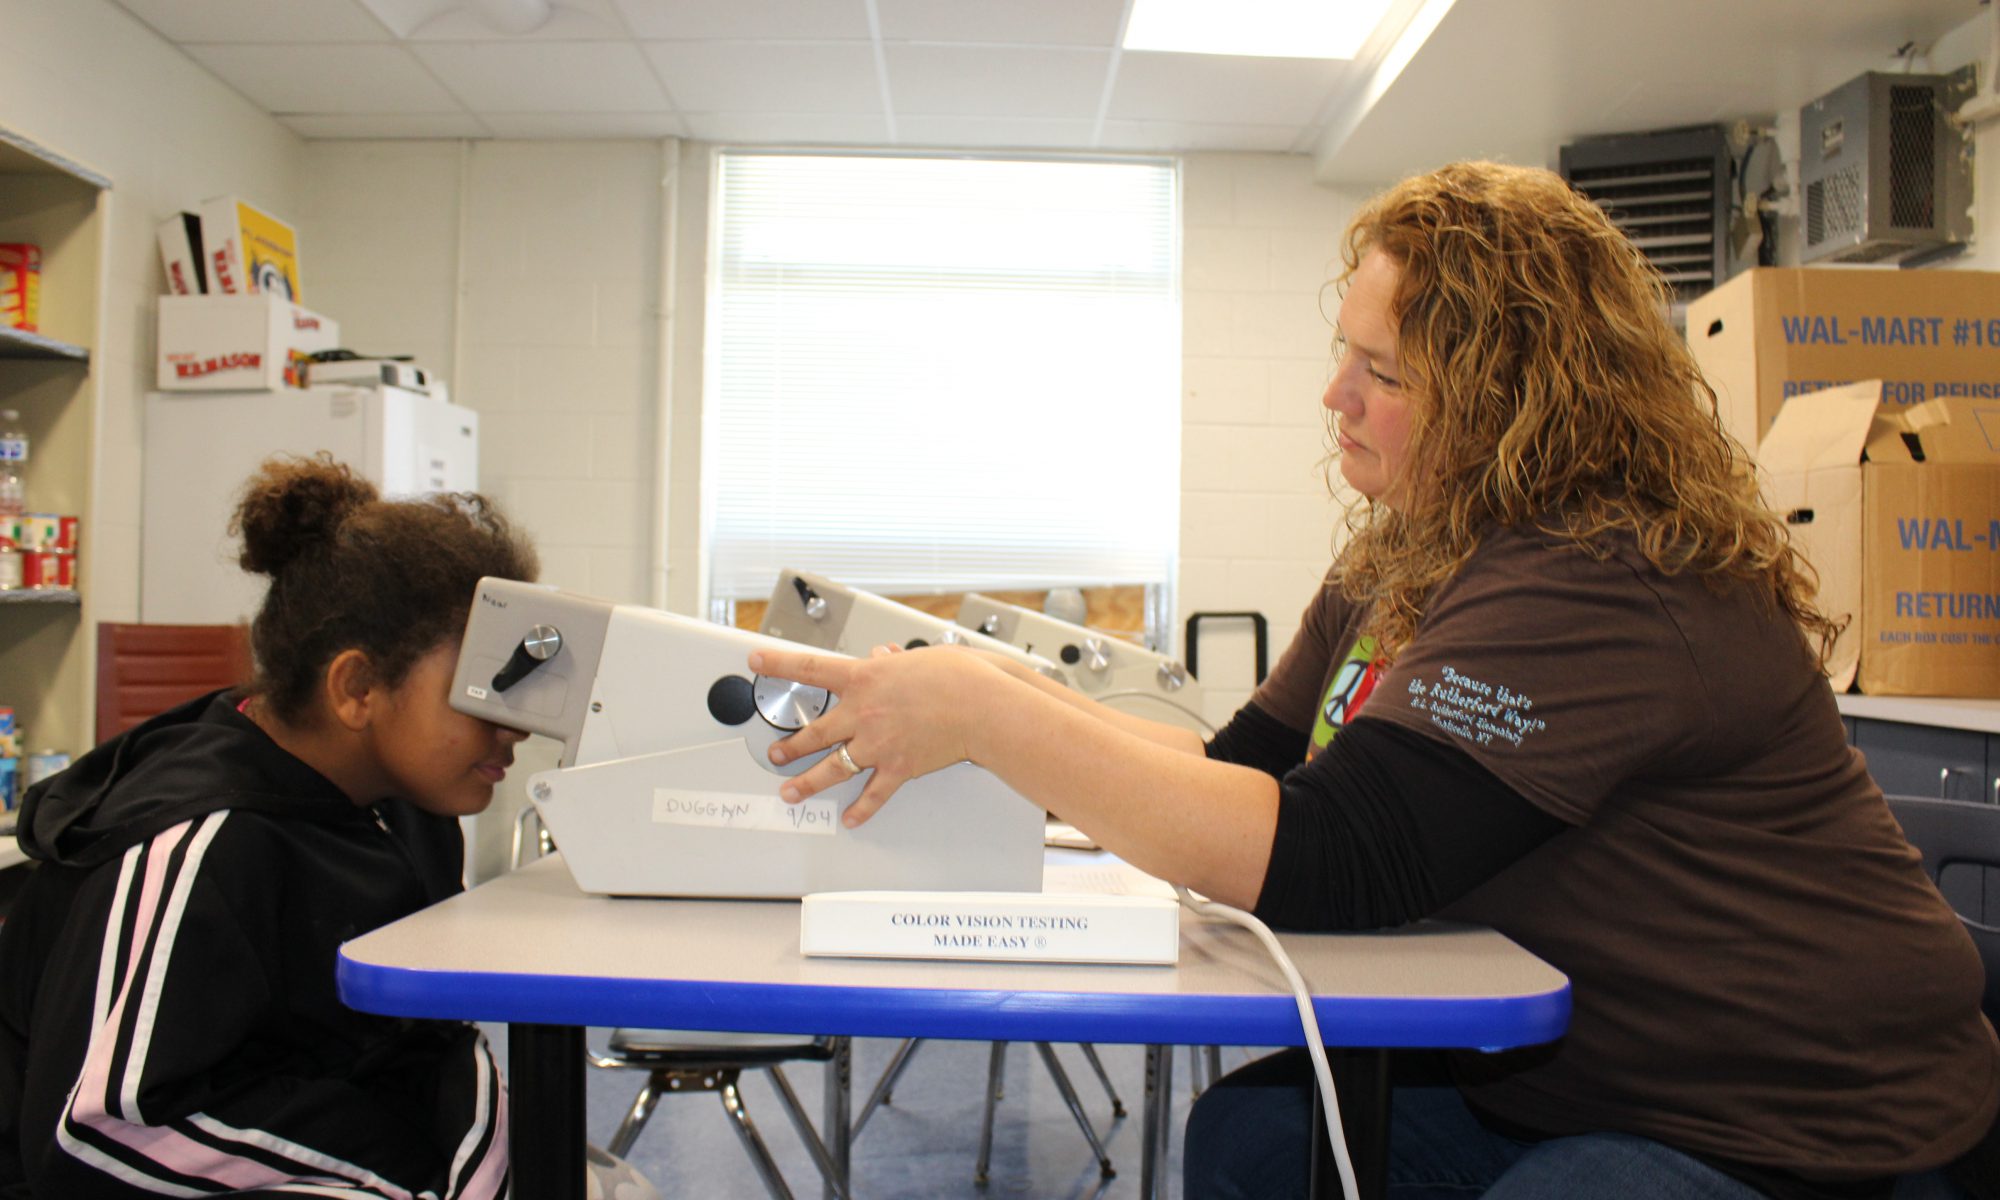 An elementary student looks into a device sitting o the table that will measure her eye health. A technician with a brown t shirt on and shoulder-length blond hair administers the test.